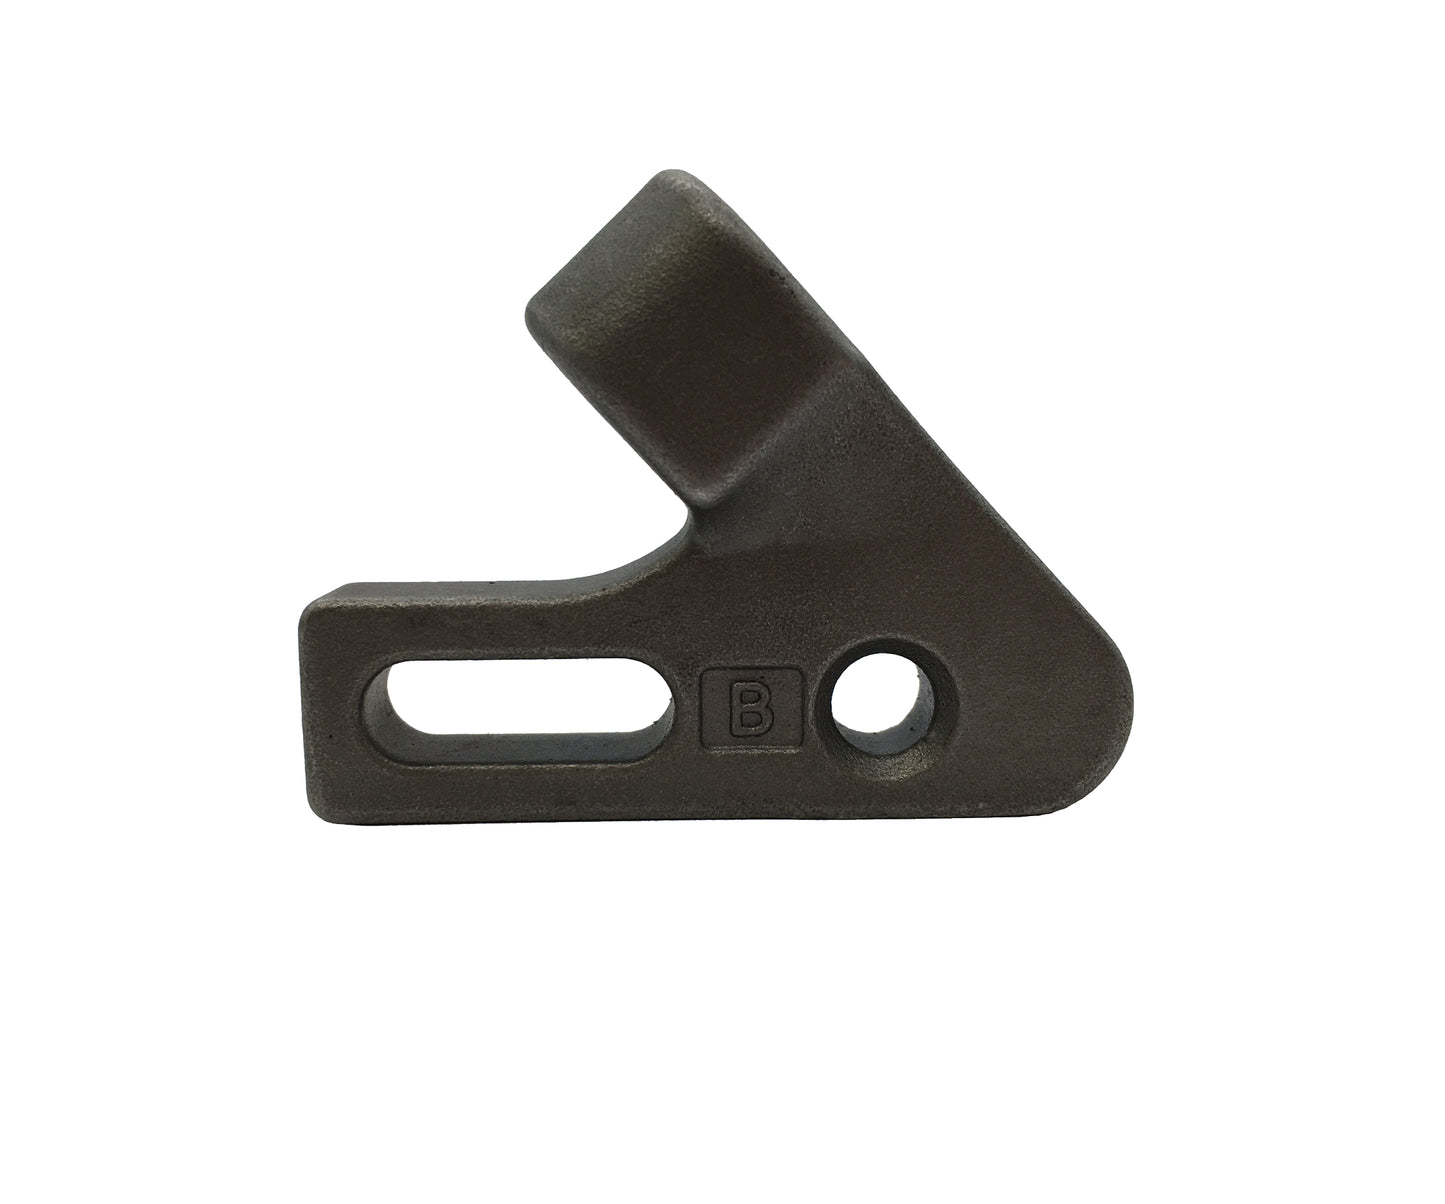 L.H. 4" Cut, Rotating Bit Holder, 135317, for many small Chain Trenchers